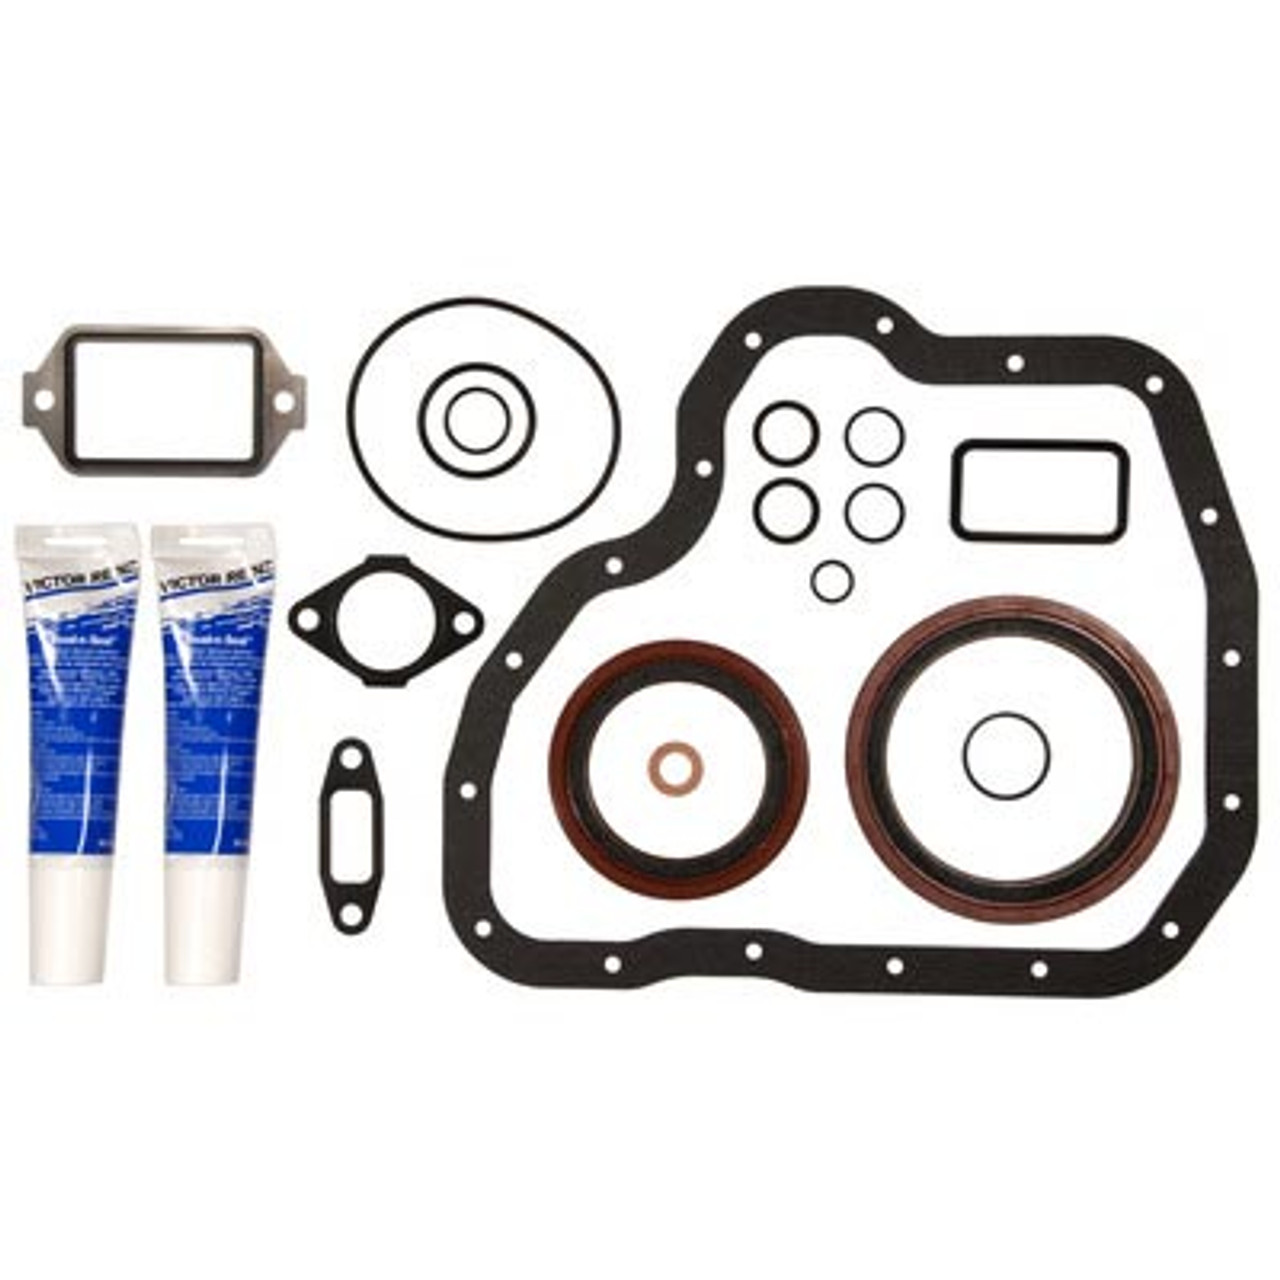 Mahle Lower Engine Gasket Set 2001 to 2007 6.6L LB7/LLY/LBZ Duramax (MCICS54580)-Main View